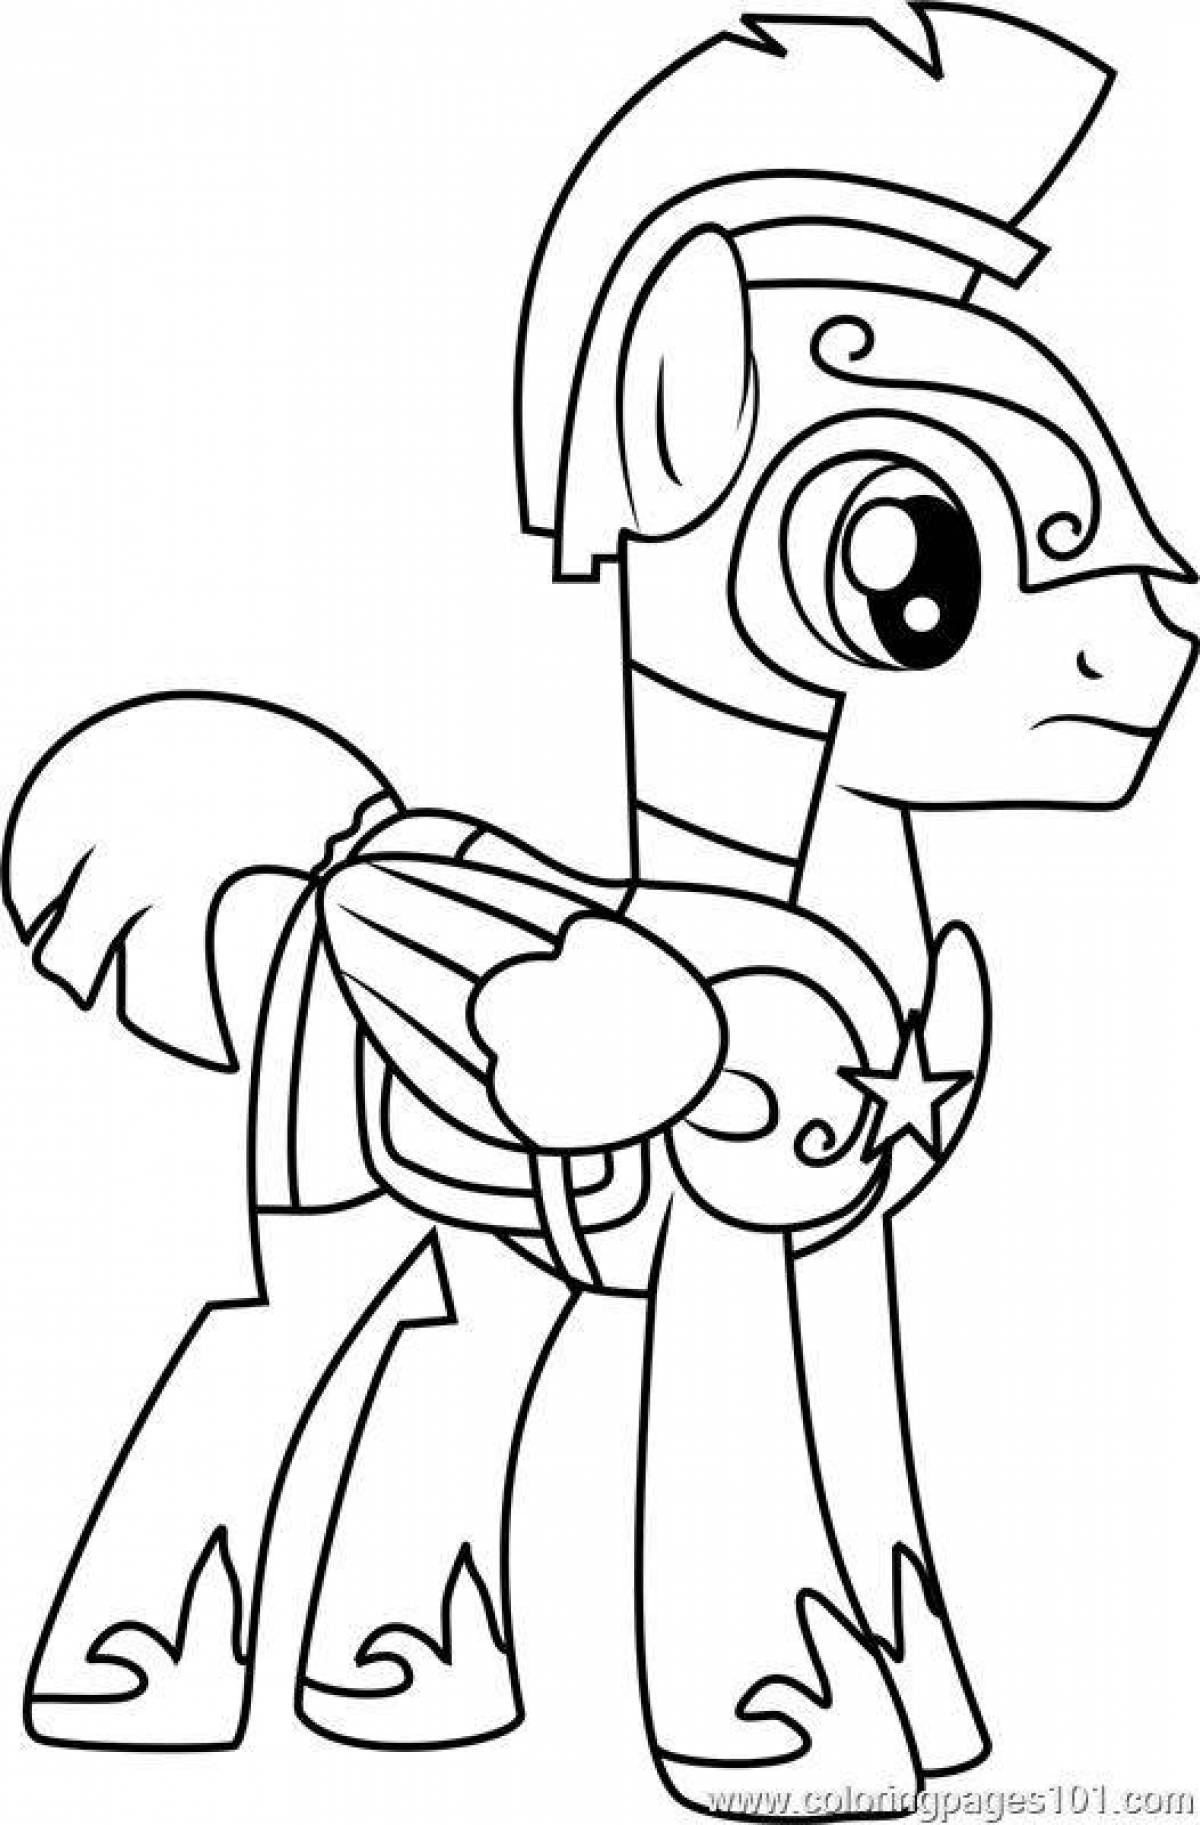 Exquisite mlp coloring